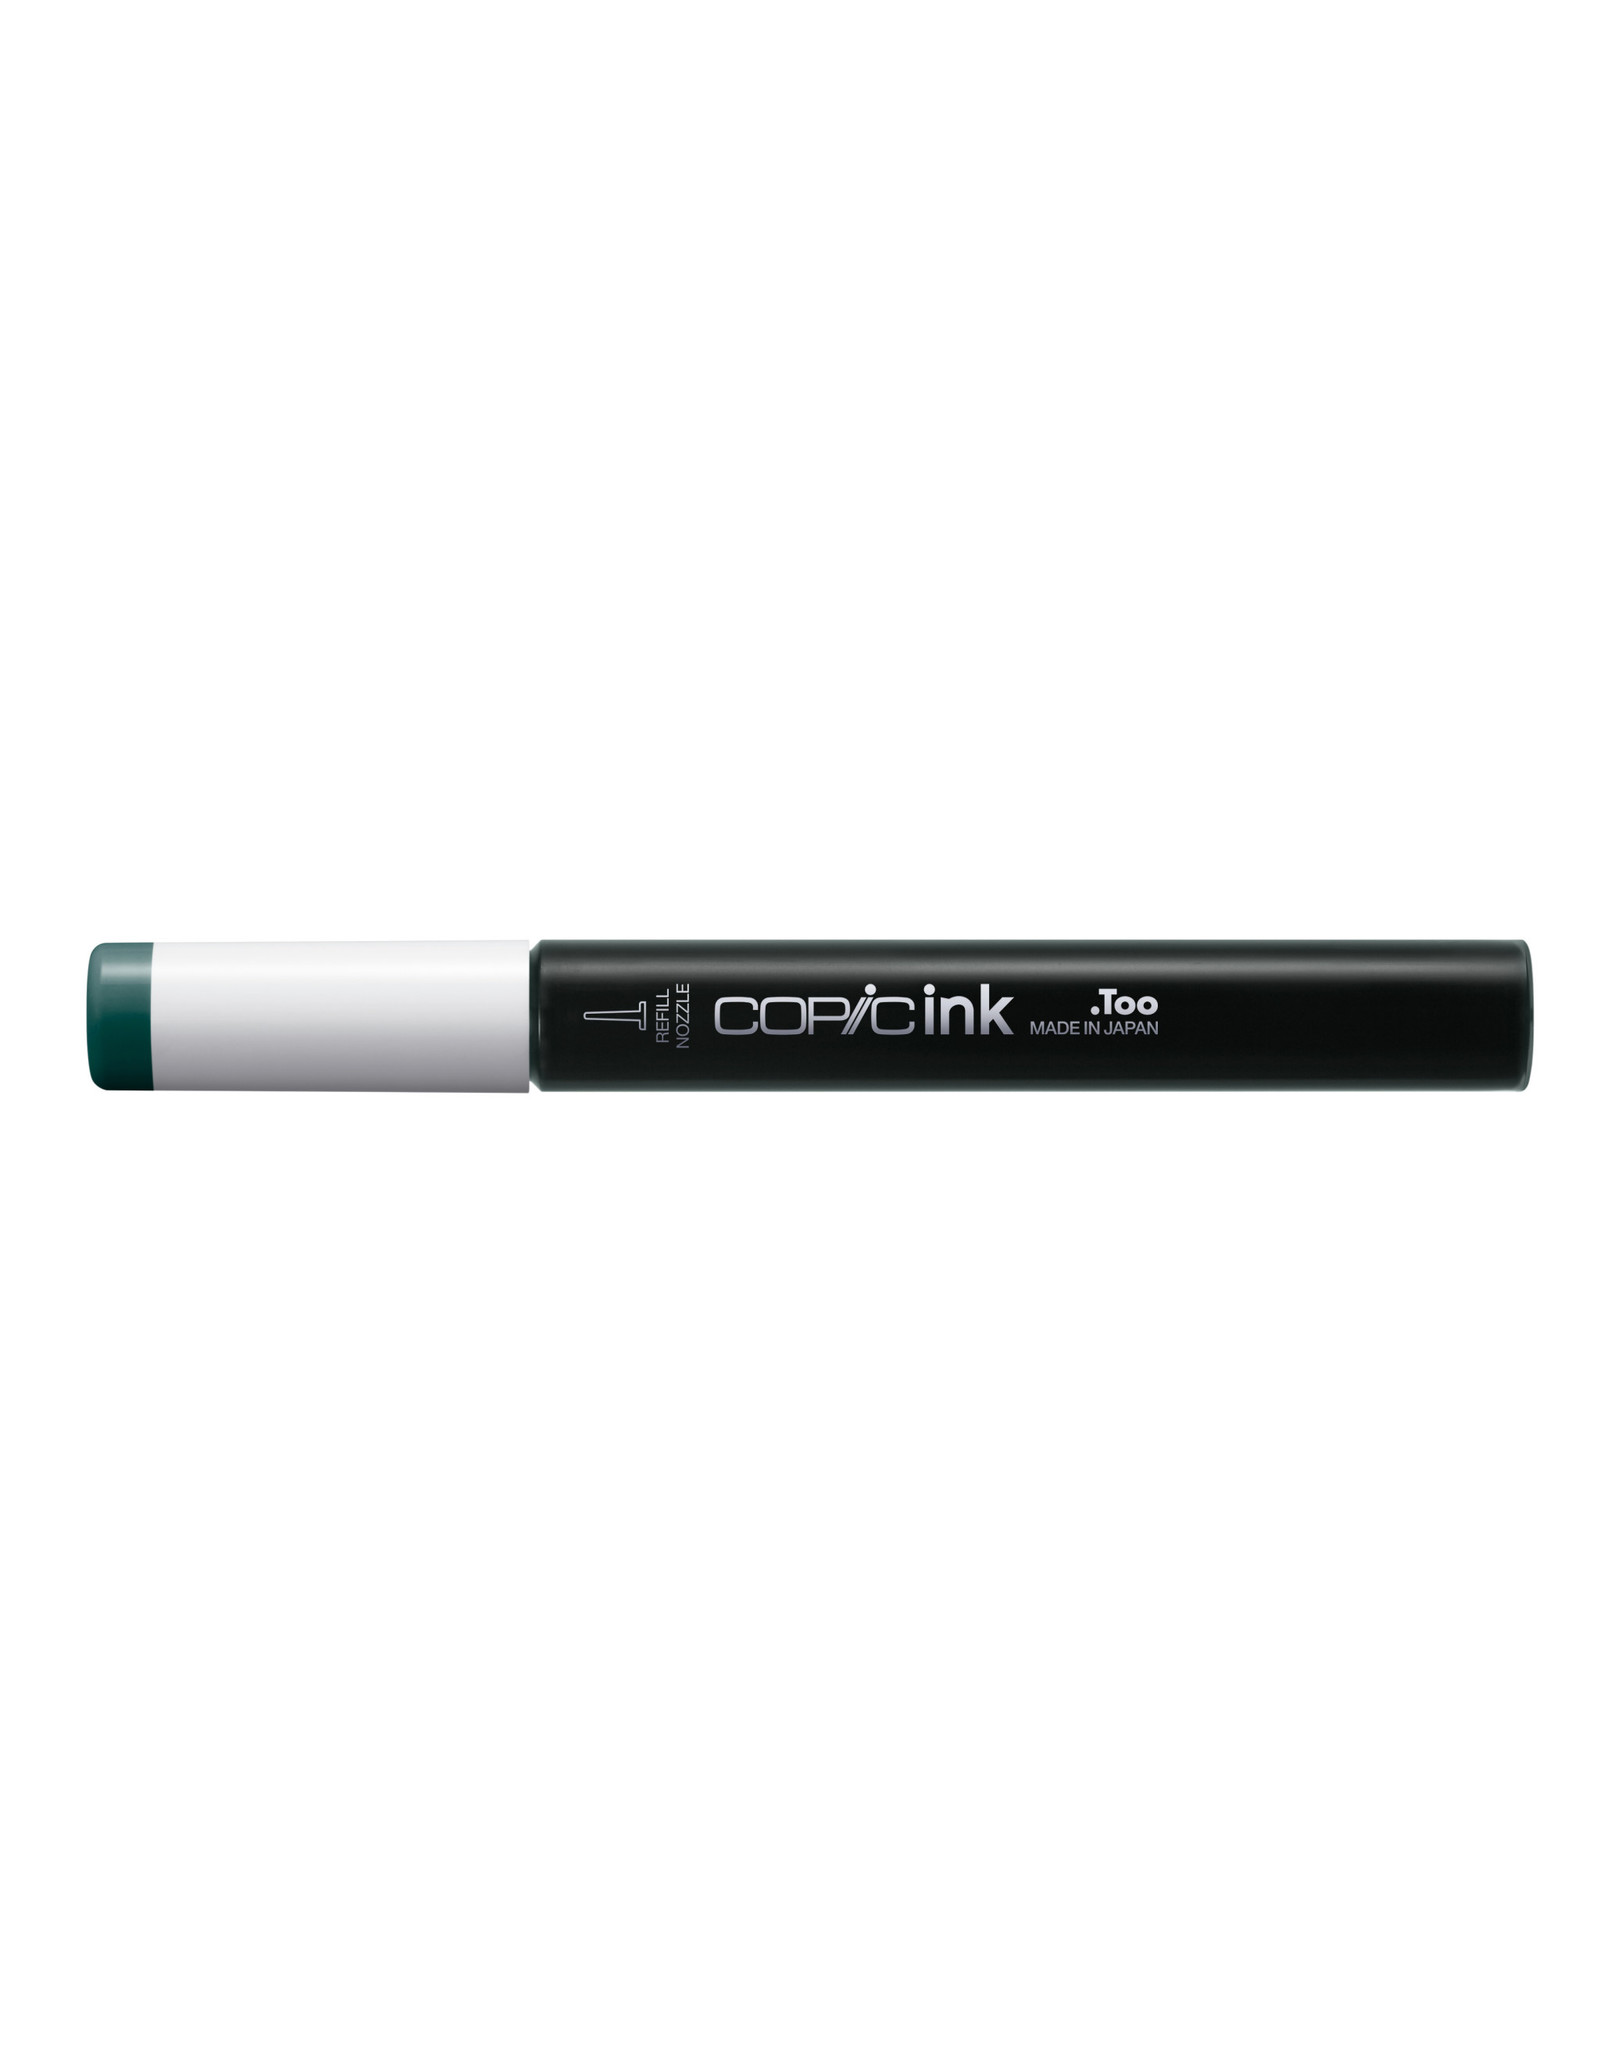 COPIC COPIC Ink 12ml BG75 Abyss Green